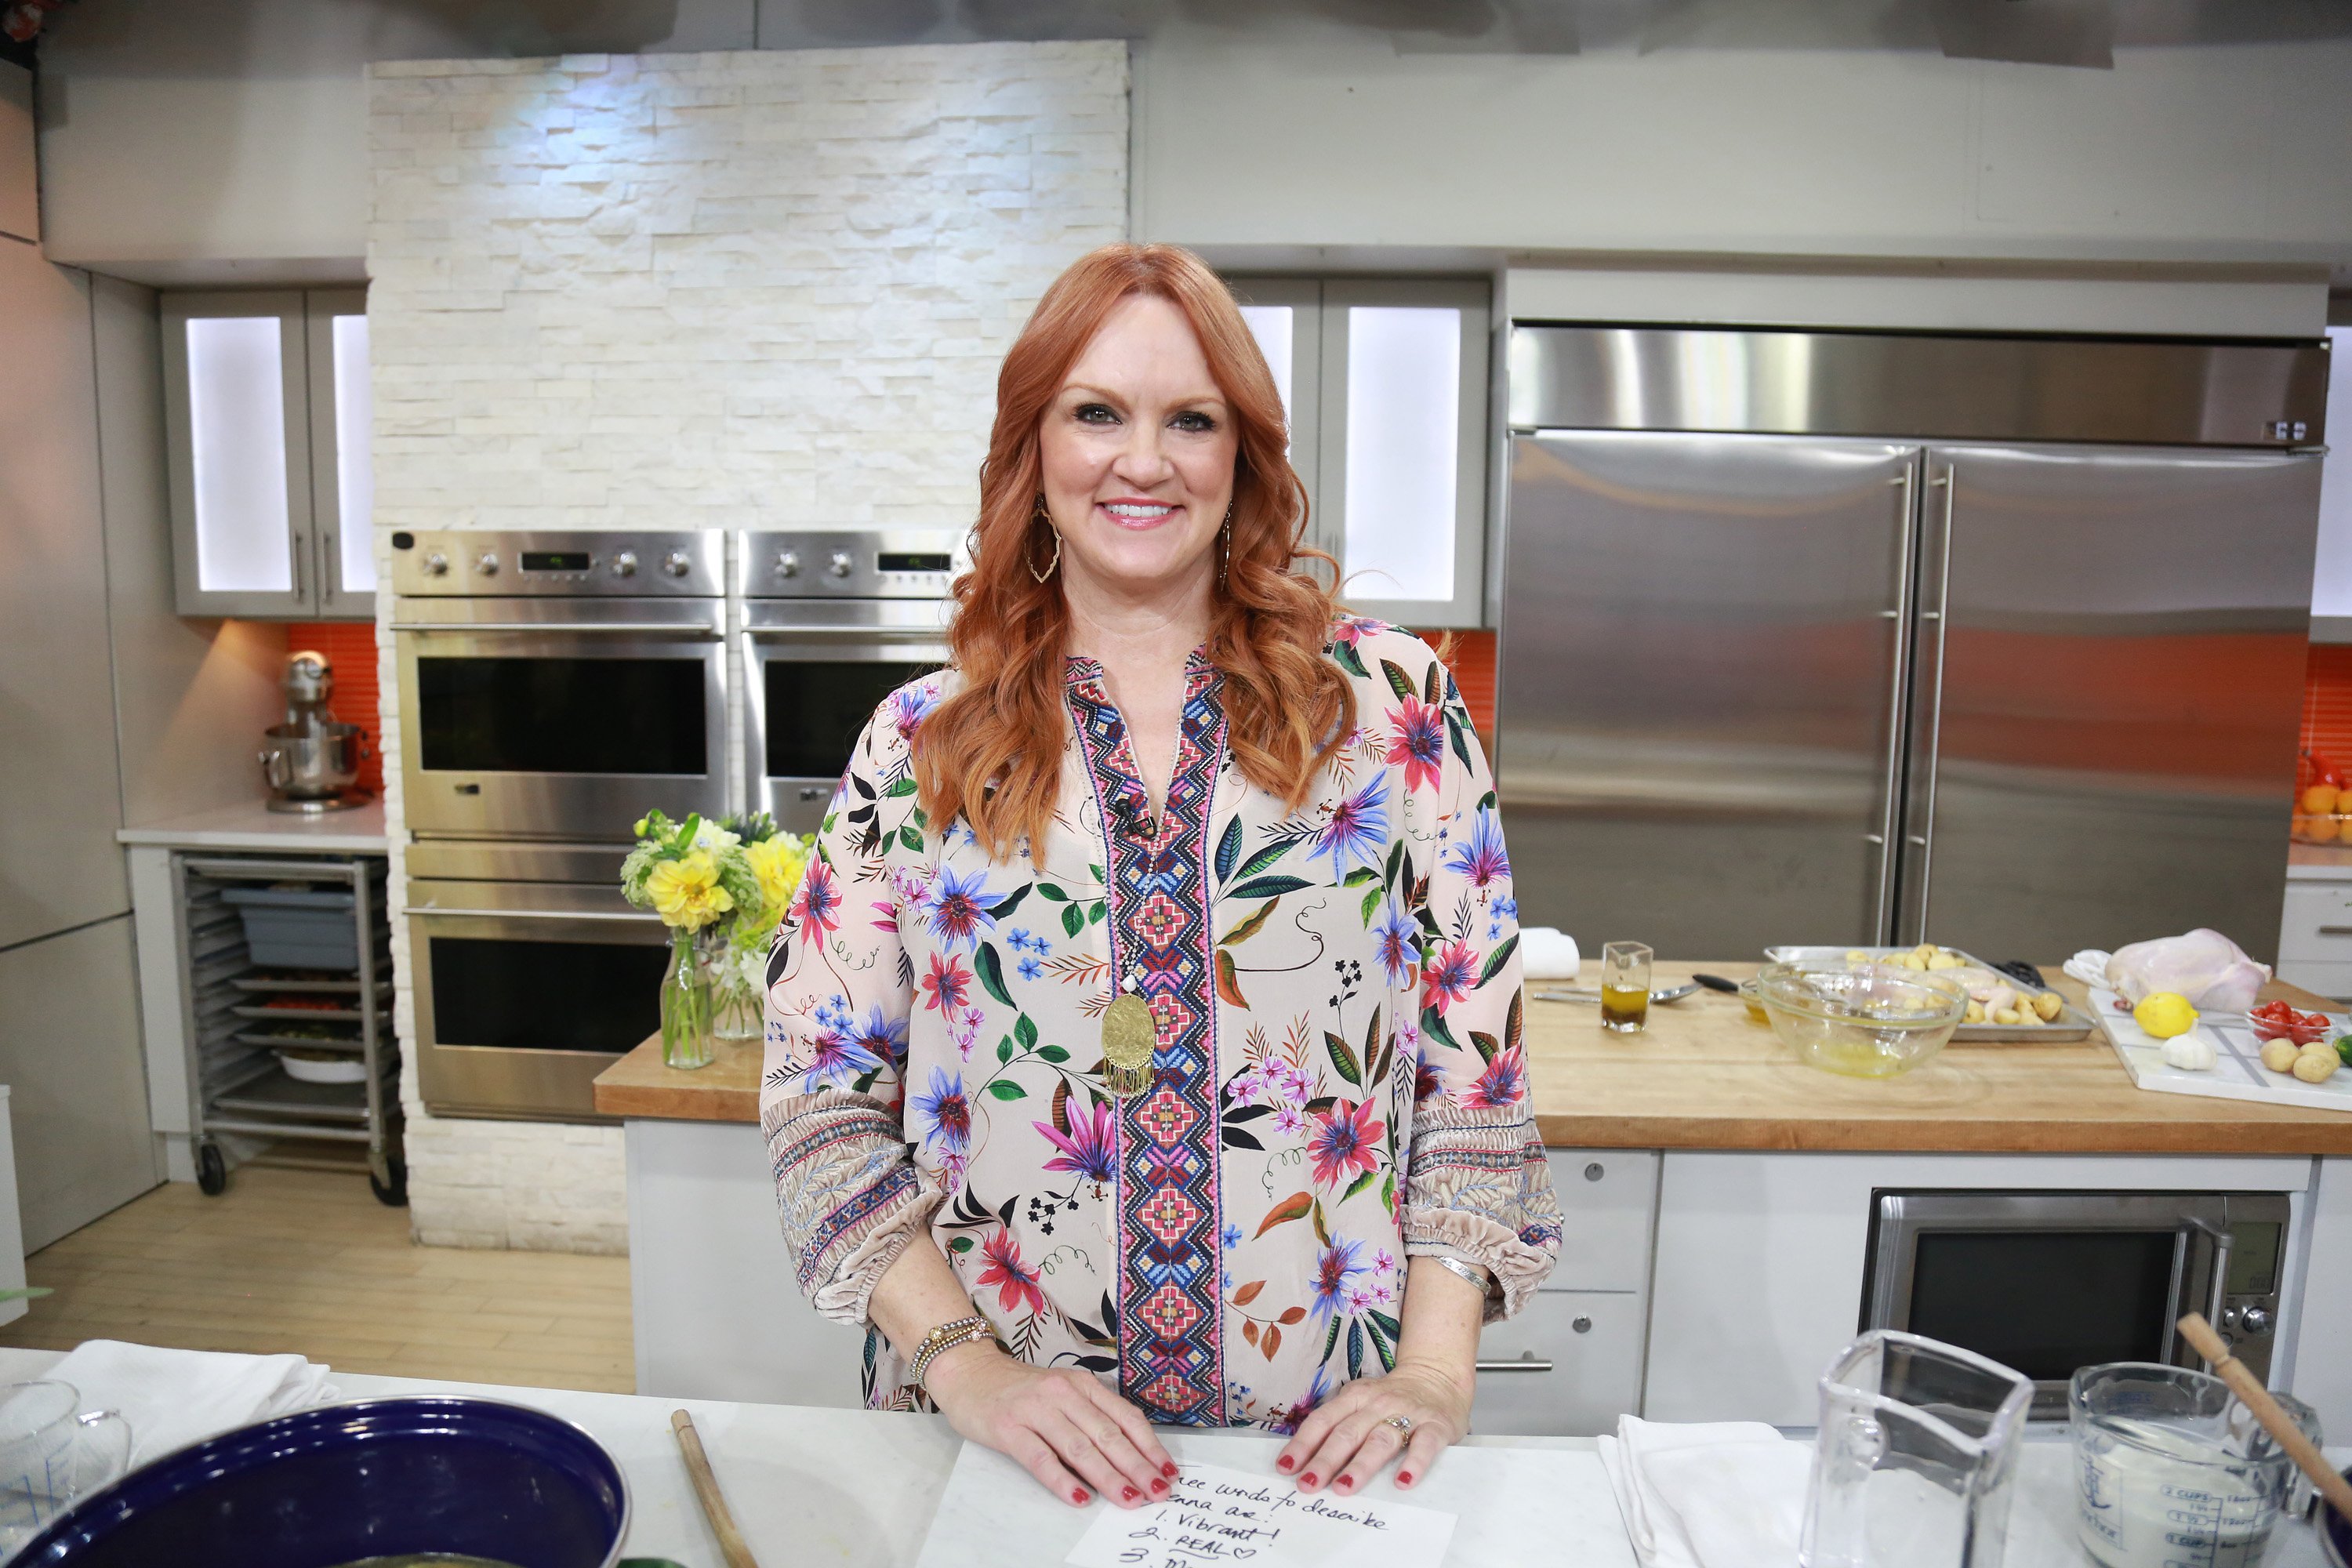 The Pioneer Woman Ree Drummond standing in the Today show kitchen.